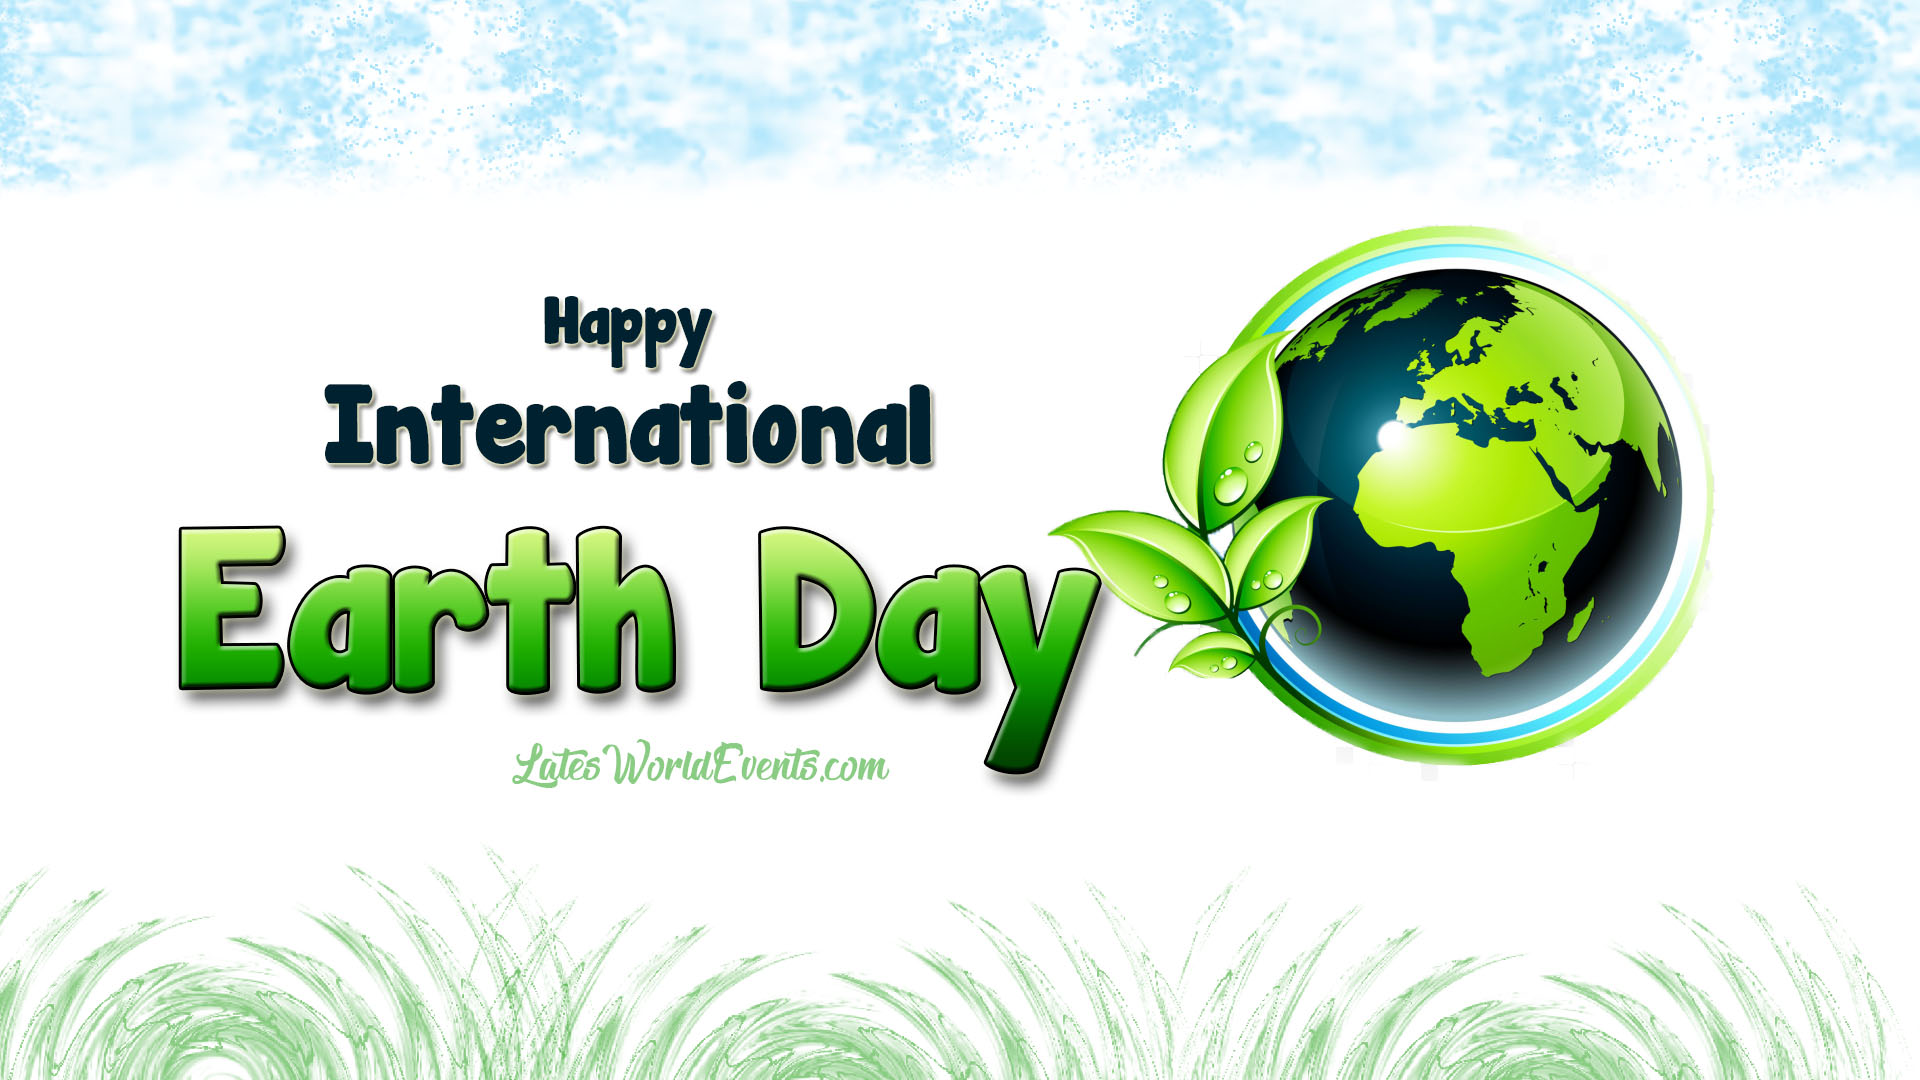 Download-happy-international-earth-day-poster-images